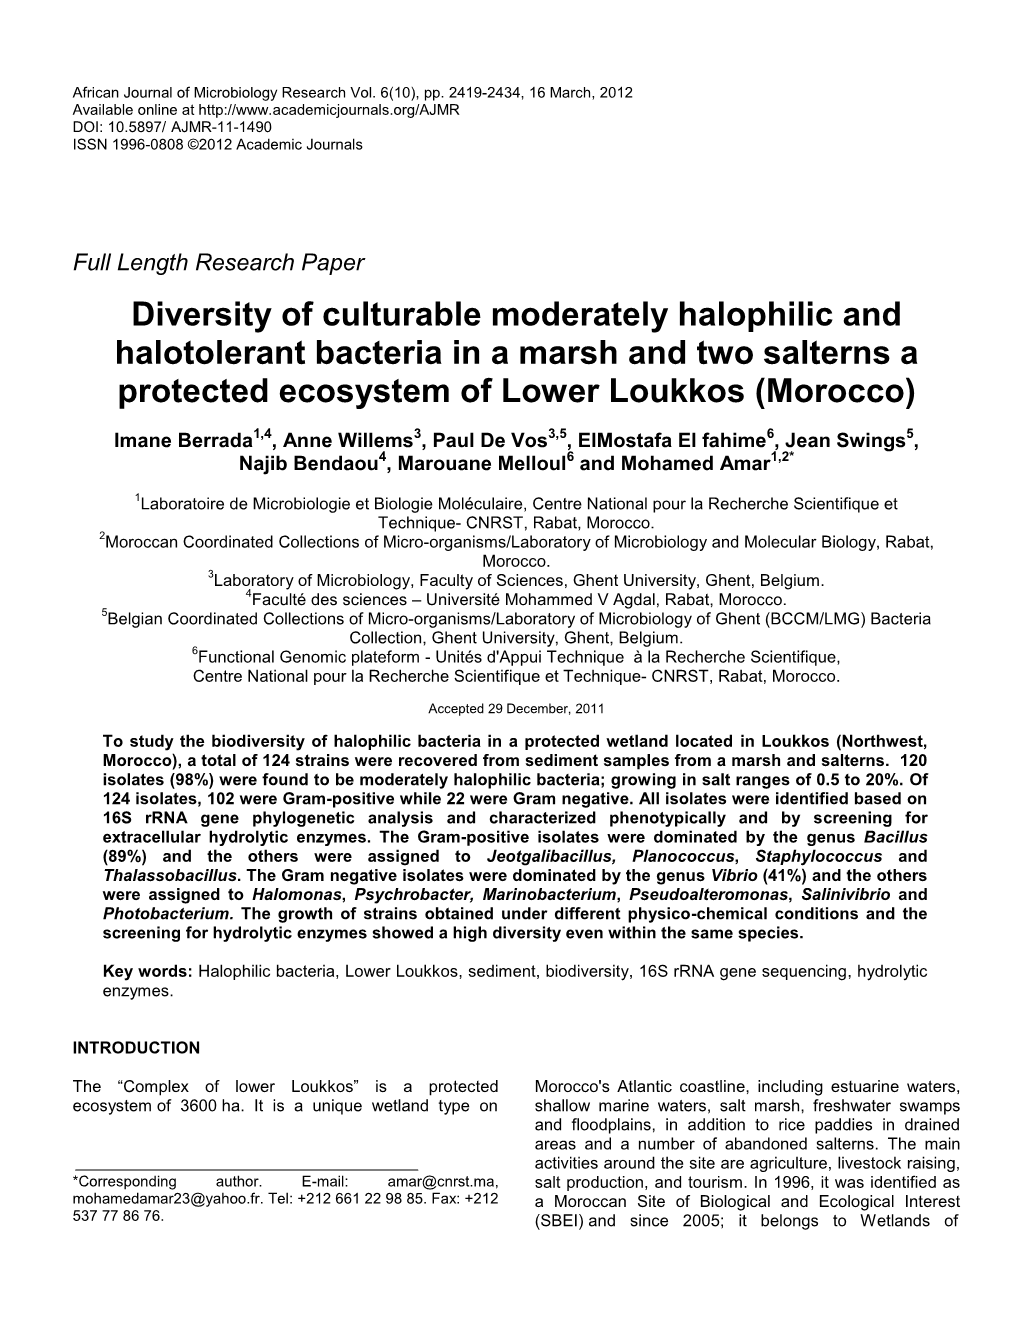 Diversity of Culturable Moderately Halophilic and Halotolerant Bacteria in a Marsh and Two Salterns a Protected Ecosystem of Lower Loukkos (Morocco)